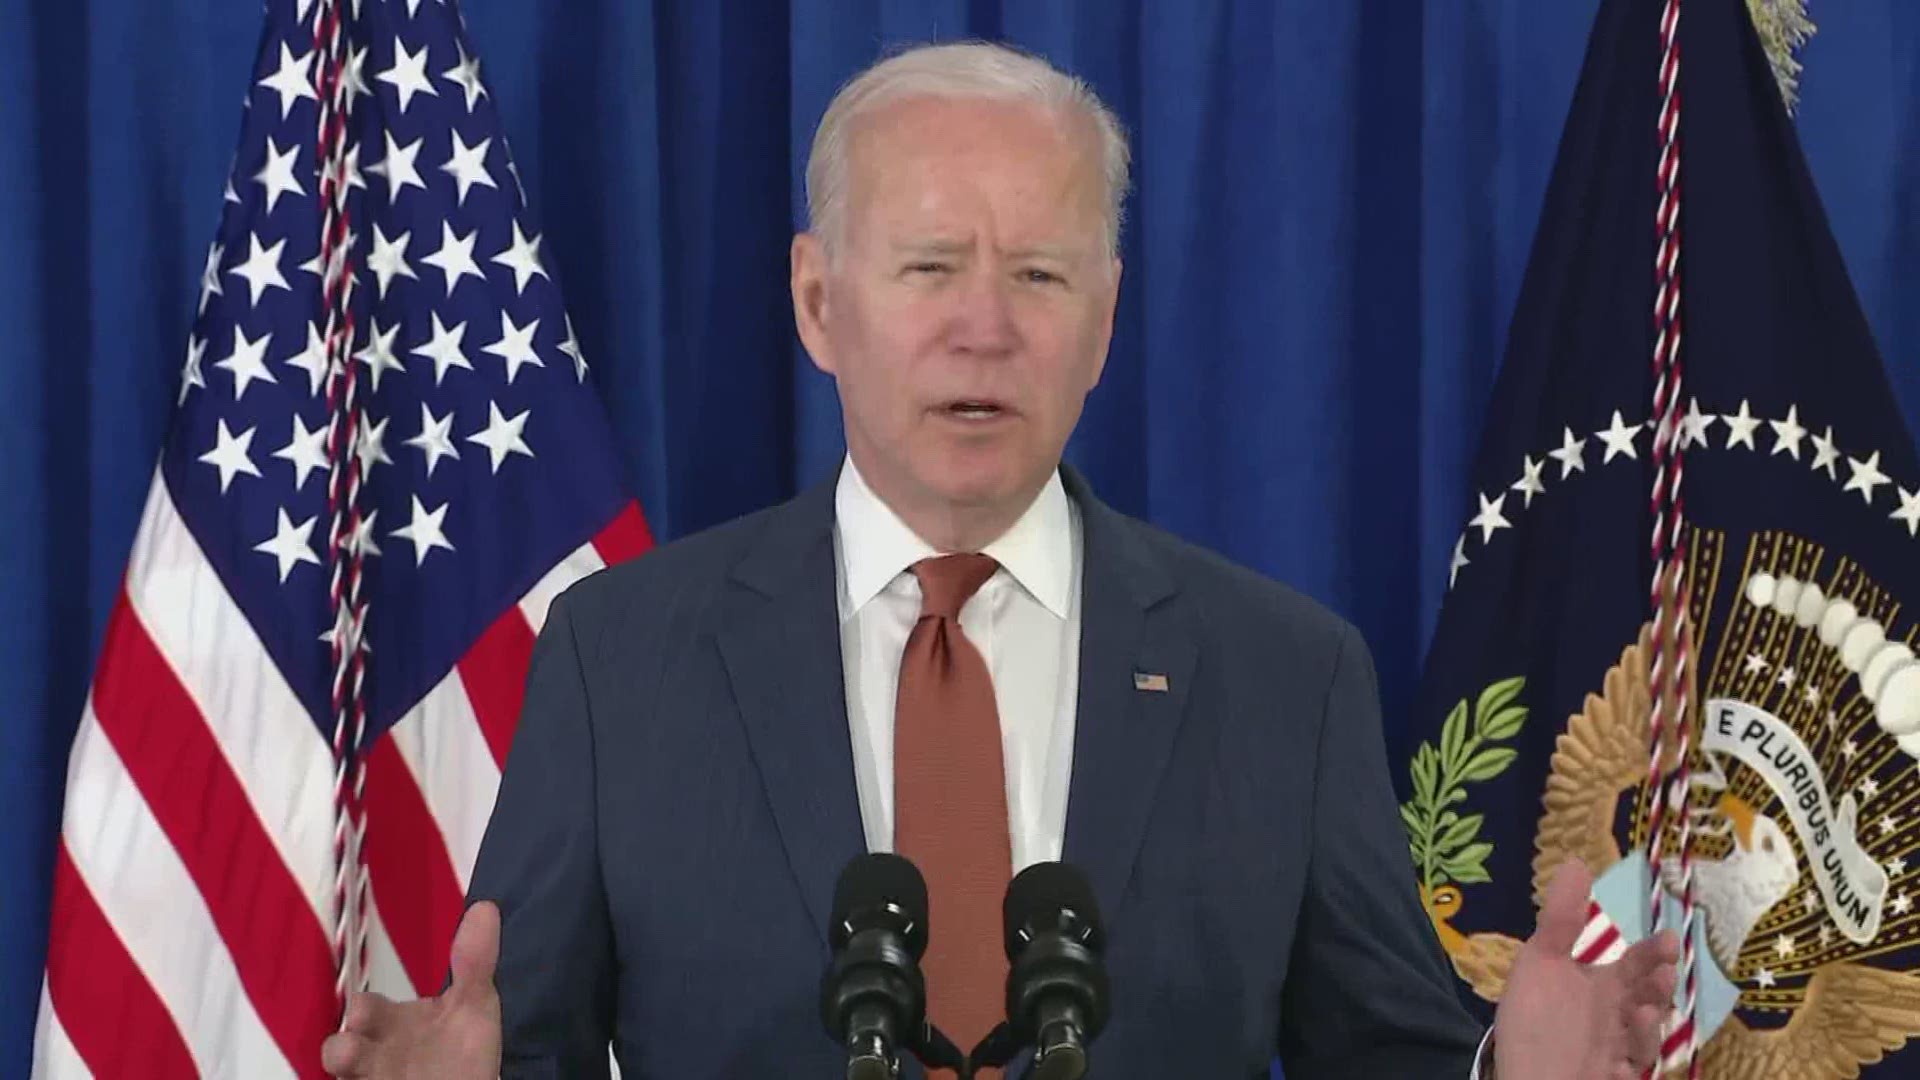 President Joe Biden addressed the nation after the May job report was released. US employers added a modest 559,000 jobs in May.